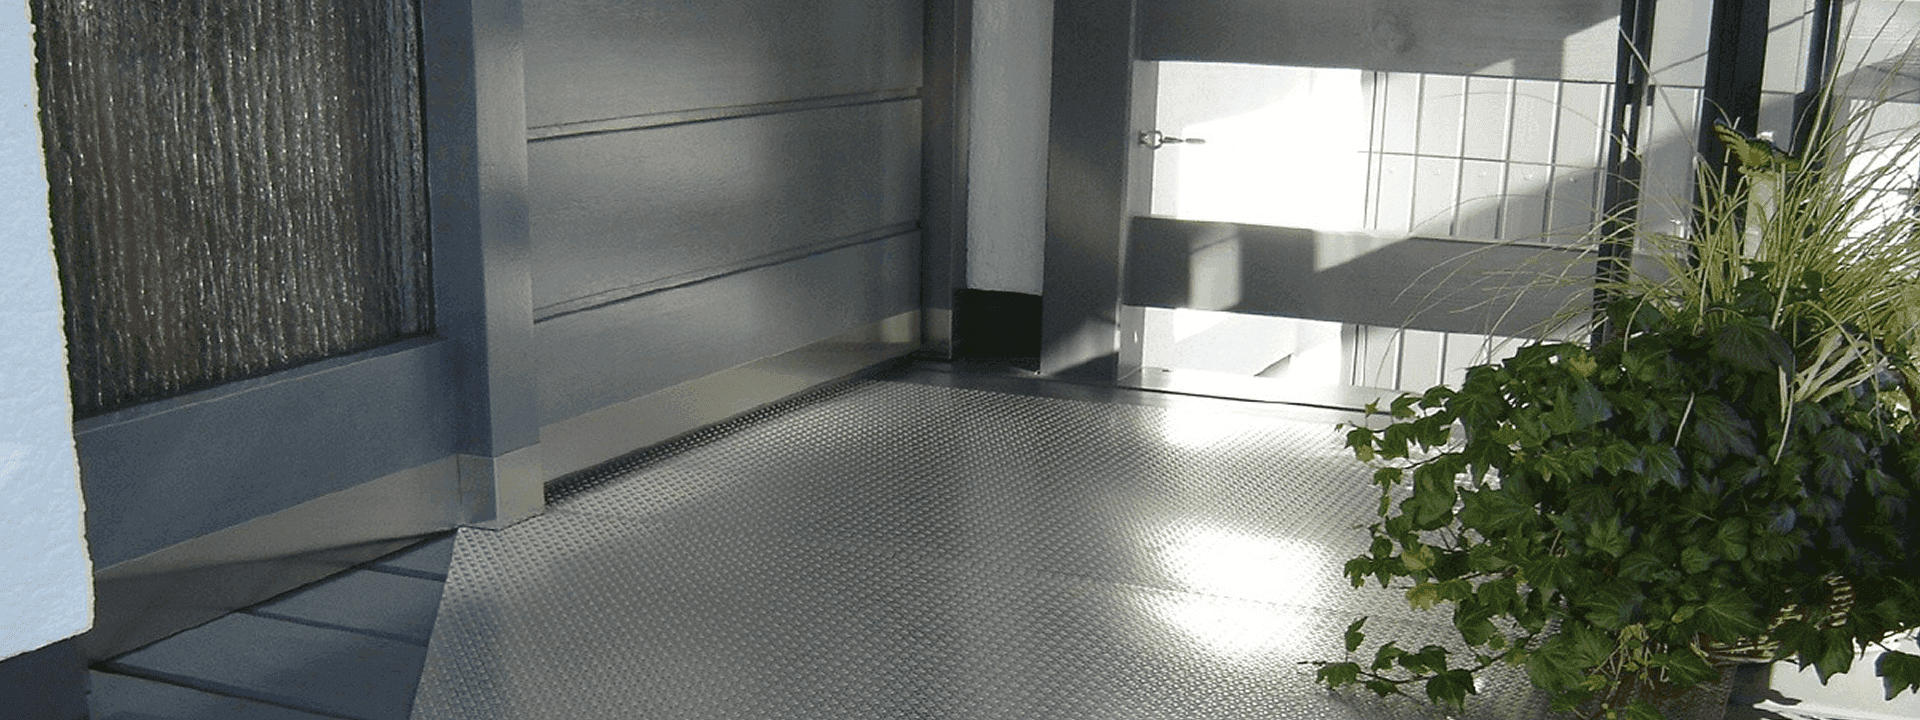 high strength alloy steel hot-rolled checker plates for flooring of a large room, and a large pot of green plants on the ground.